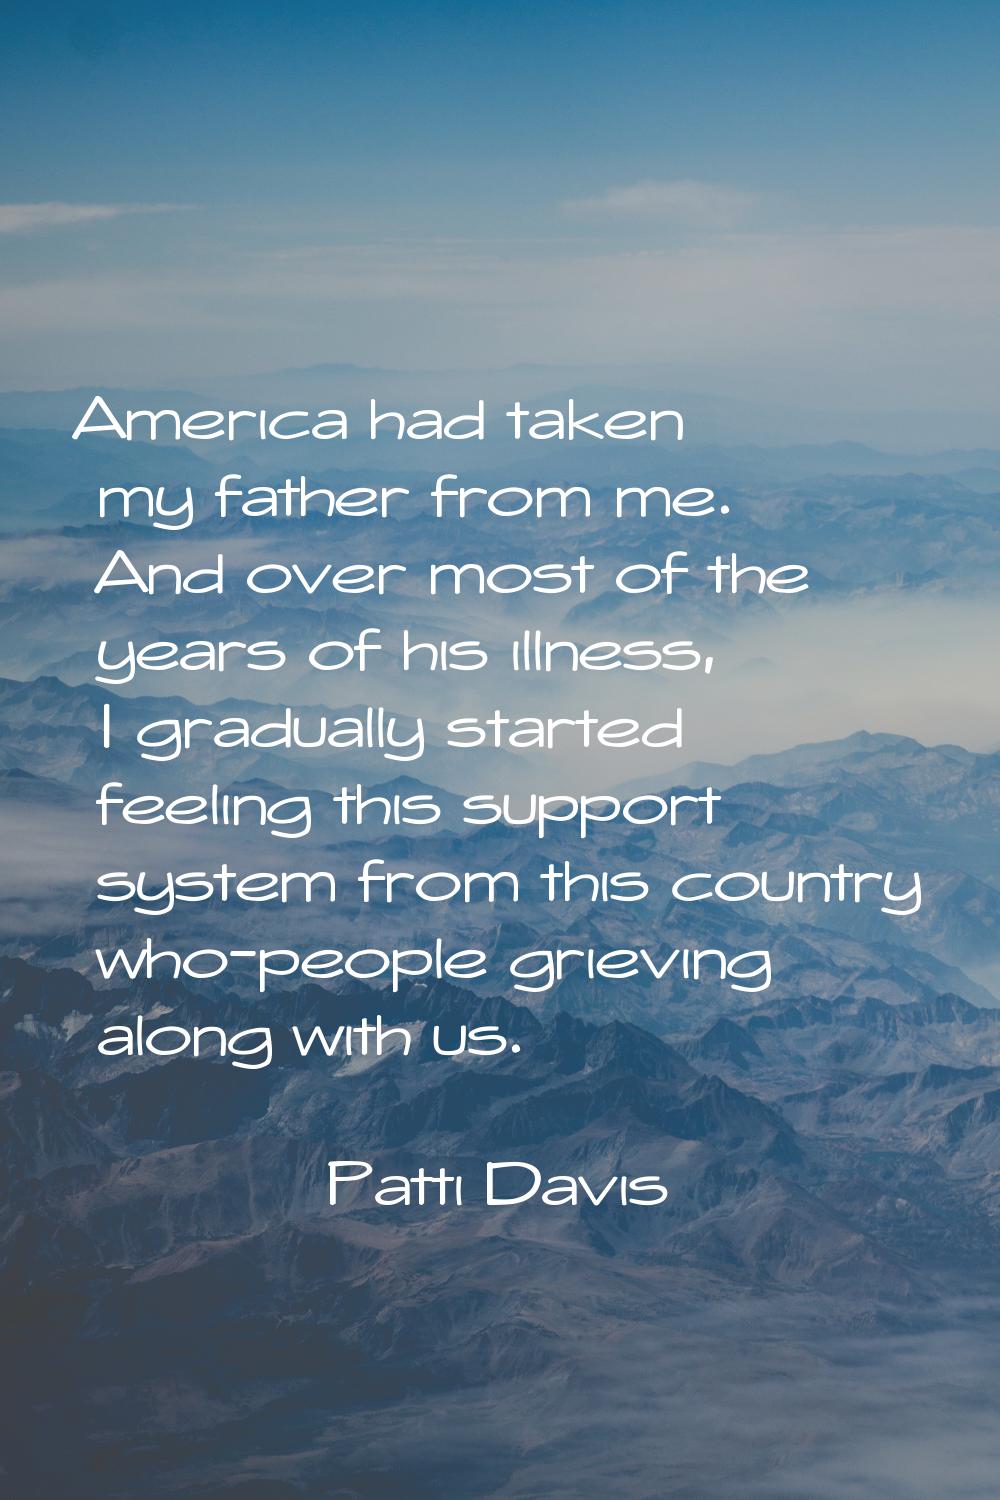 America had taken my father from me. And over most of the years of his illness, I gradually started